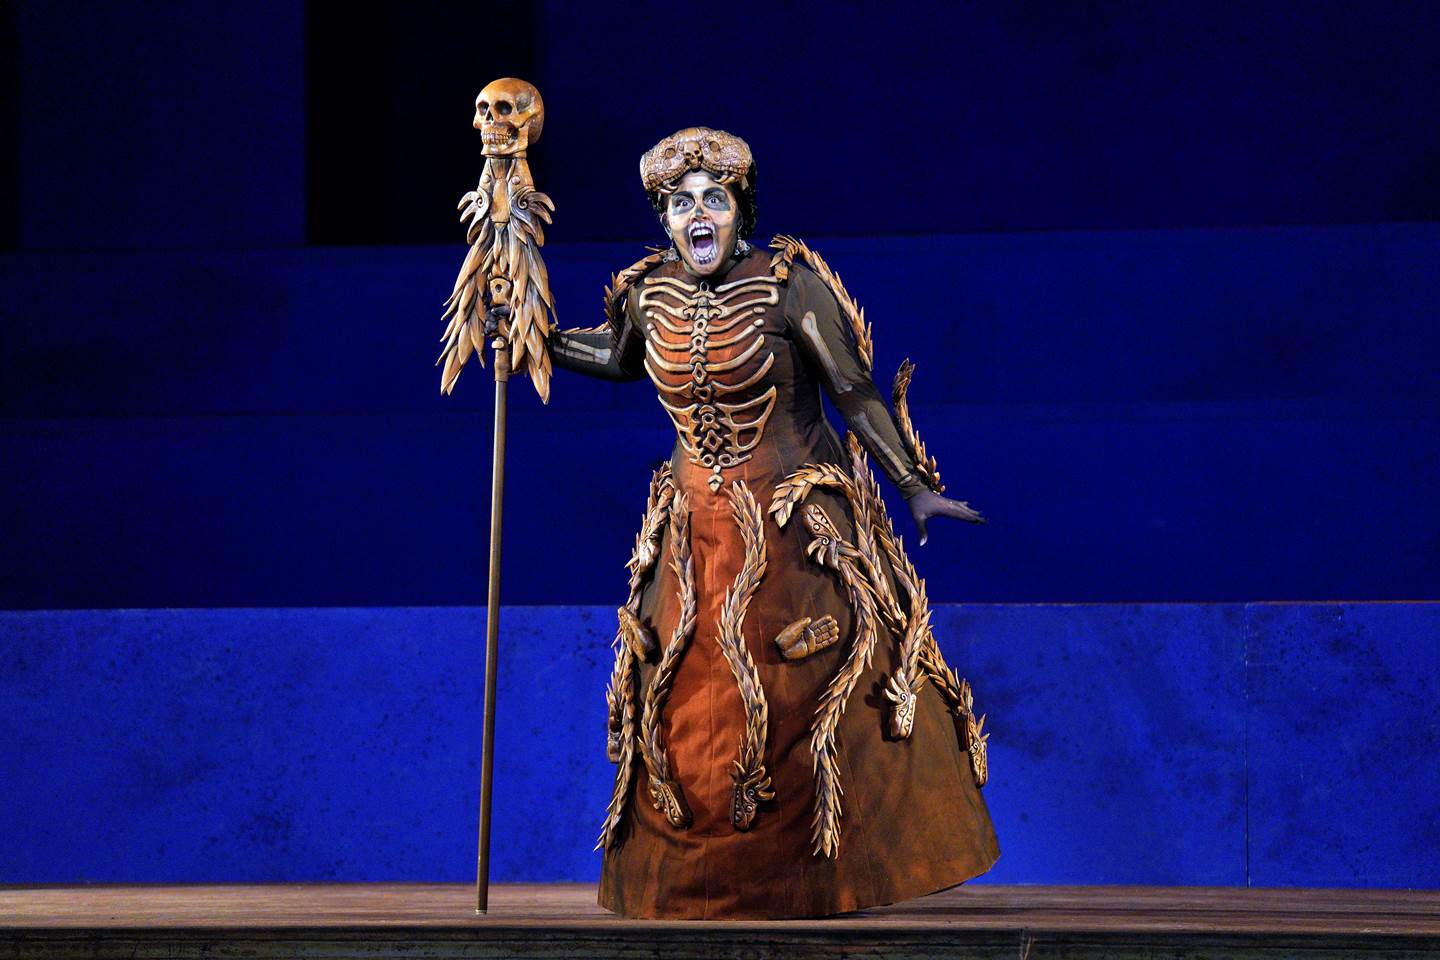 Scene from Frida of a woman dressed in a skeleton costume on stage.